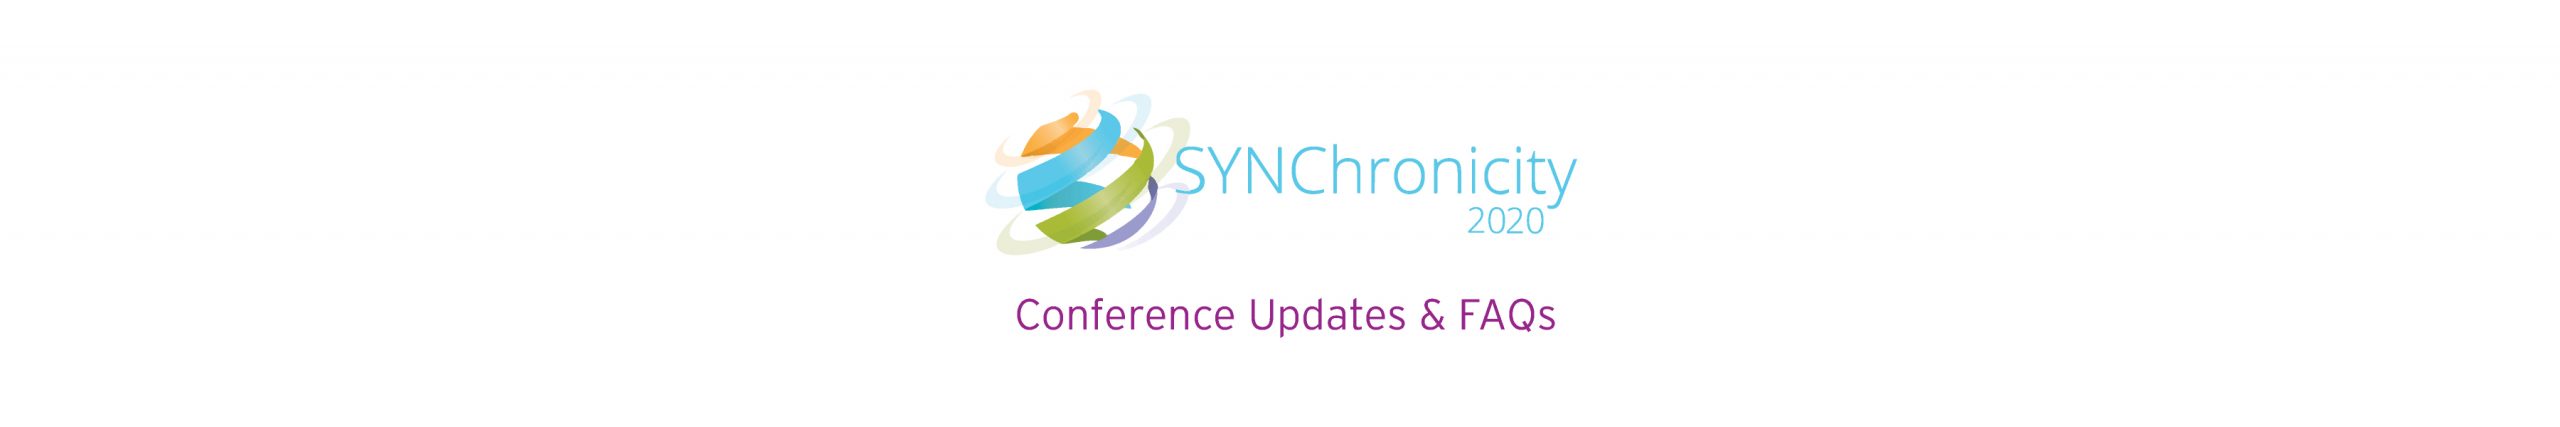 SYNChronicity 2020: Learn about what to expect at this virtual conference